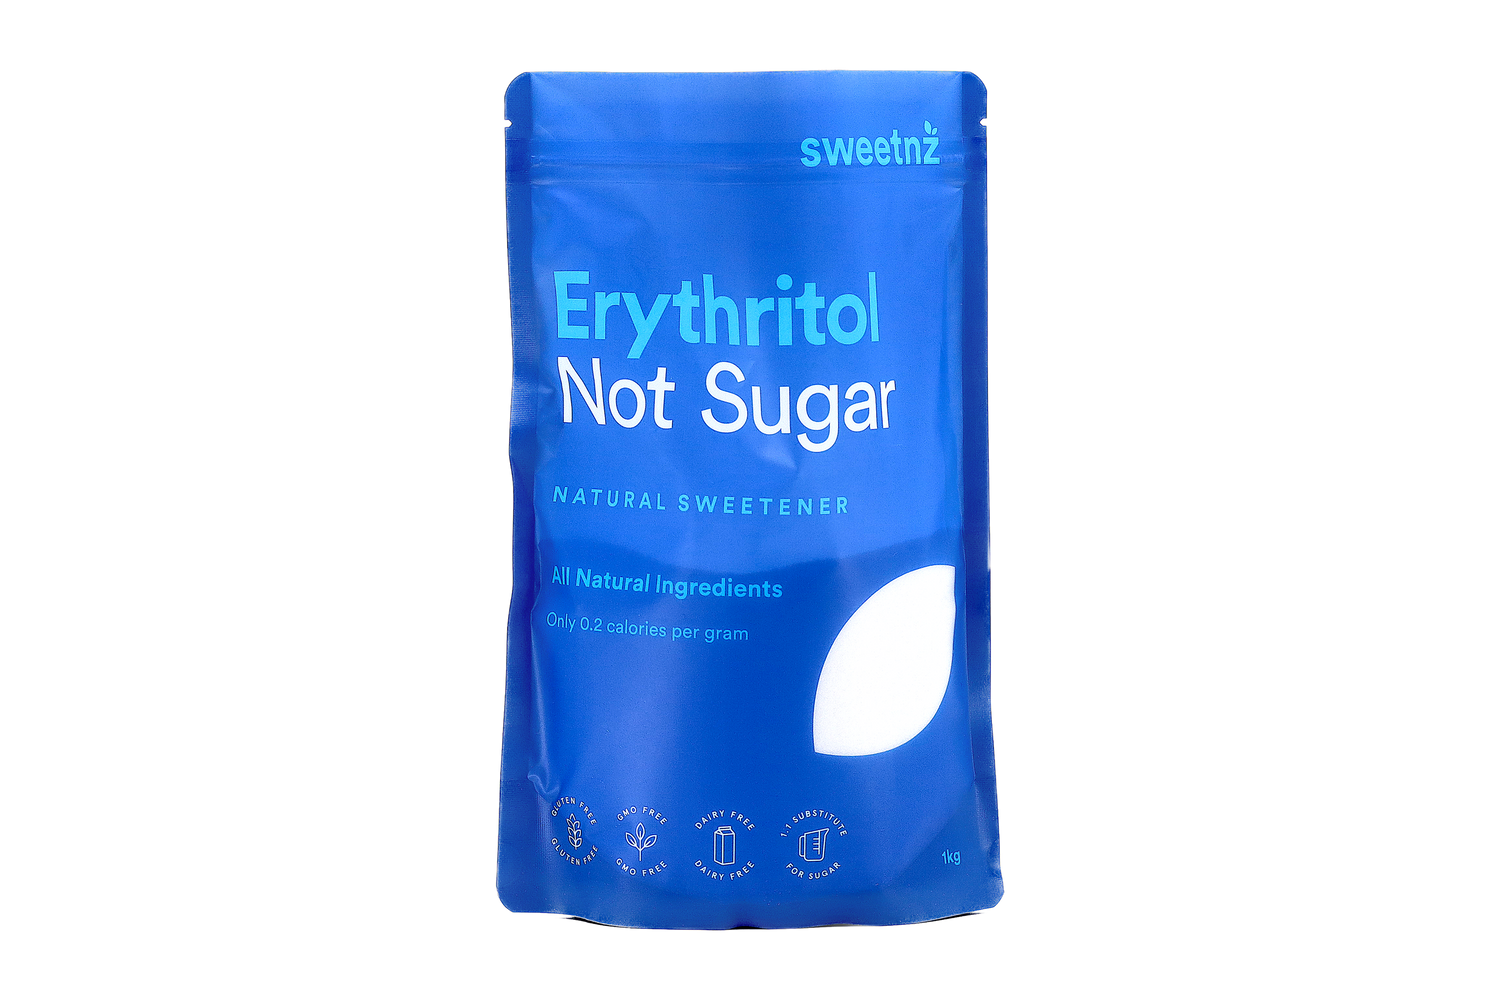 Erythritol 1kg. 70% the sweetness of table sugar, but without the calories!